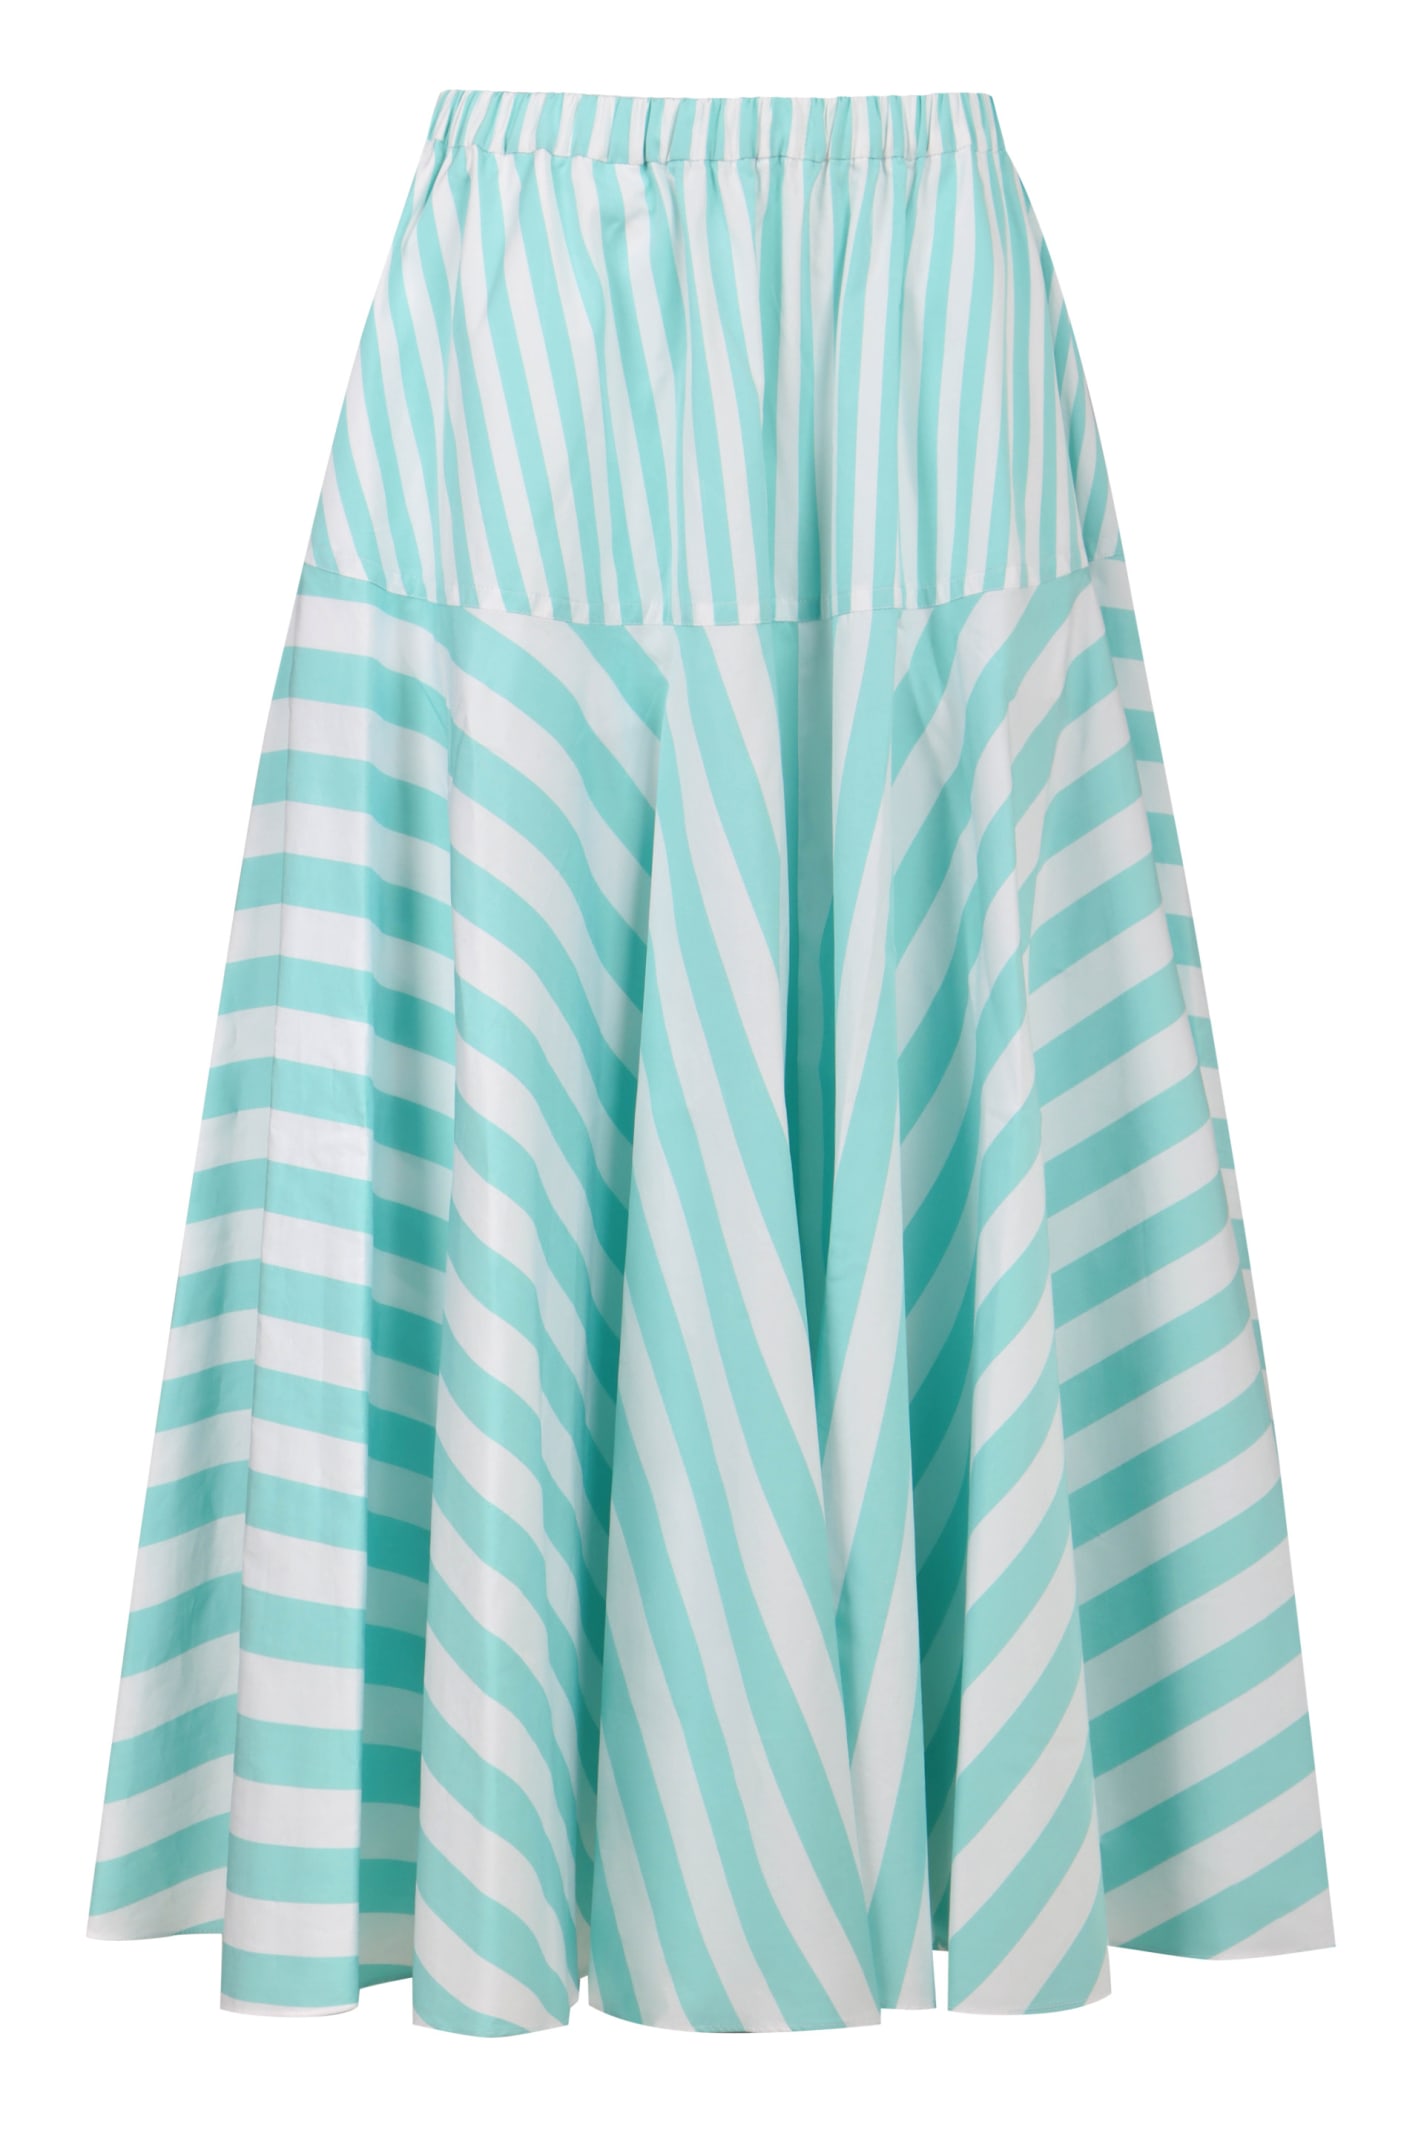 Patou Printed Cotton Skirt In Light Blue